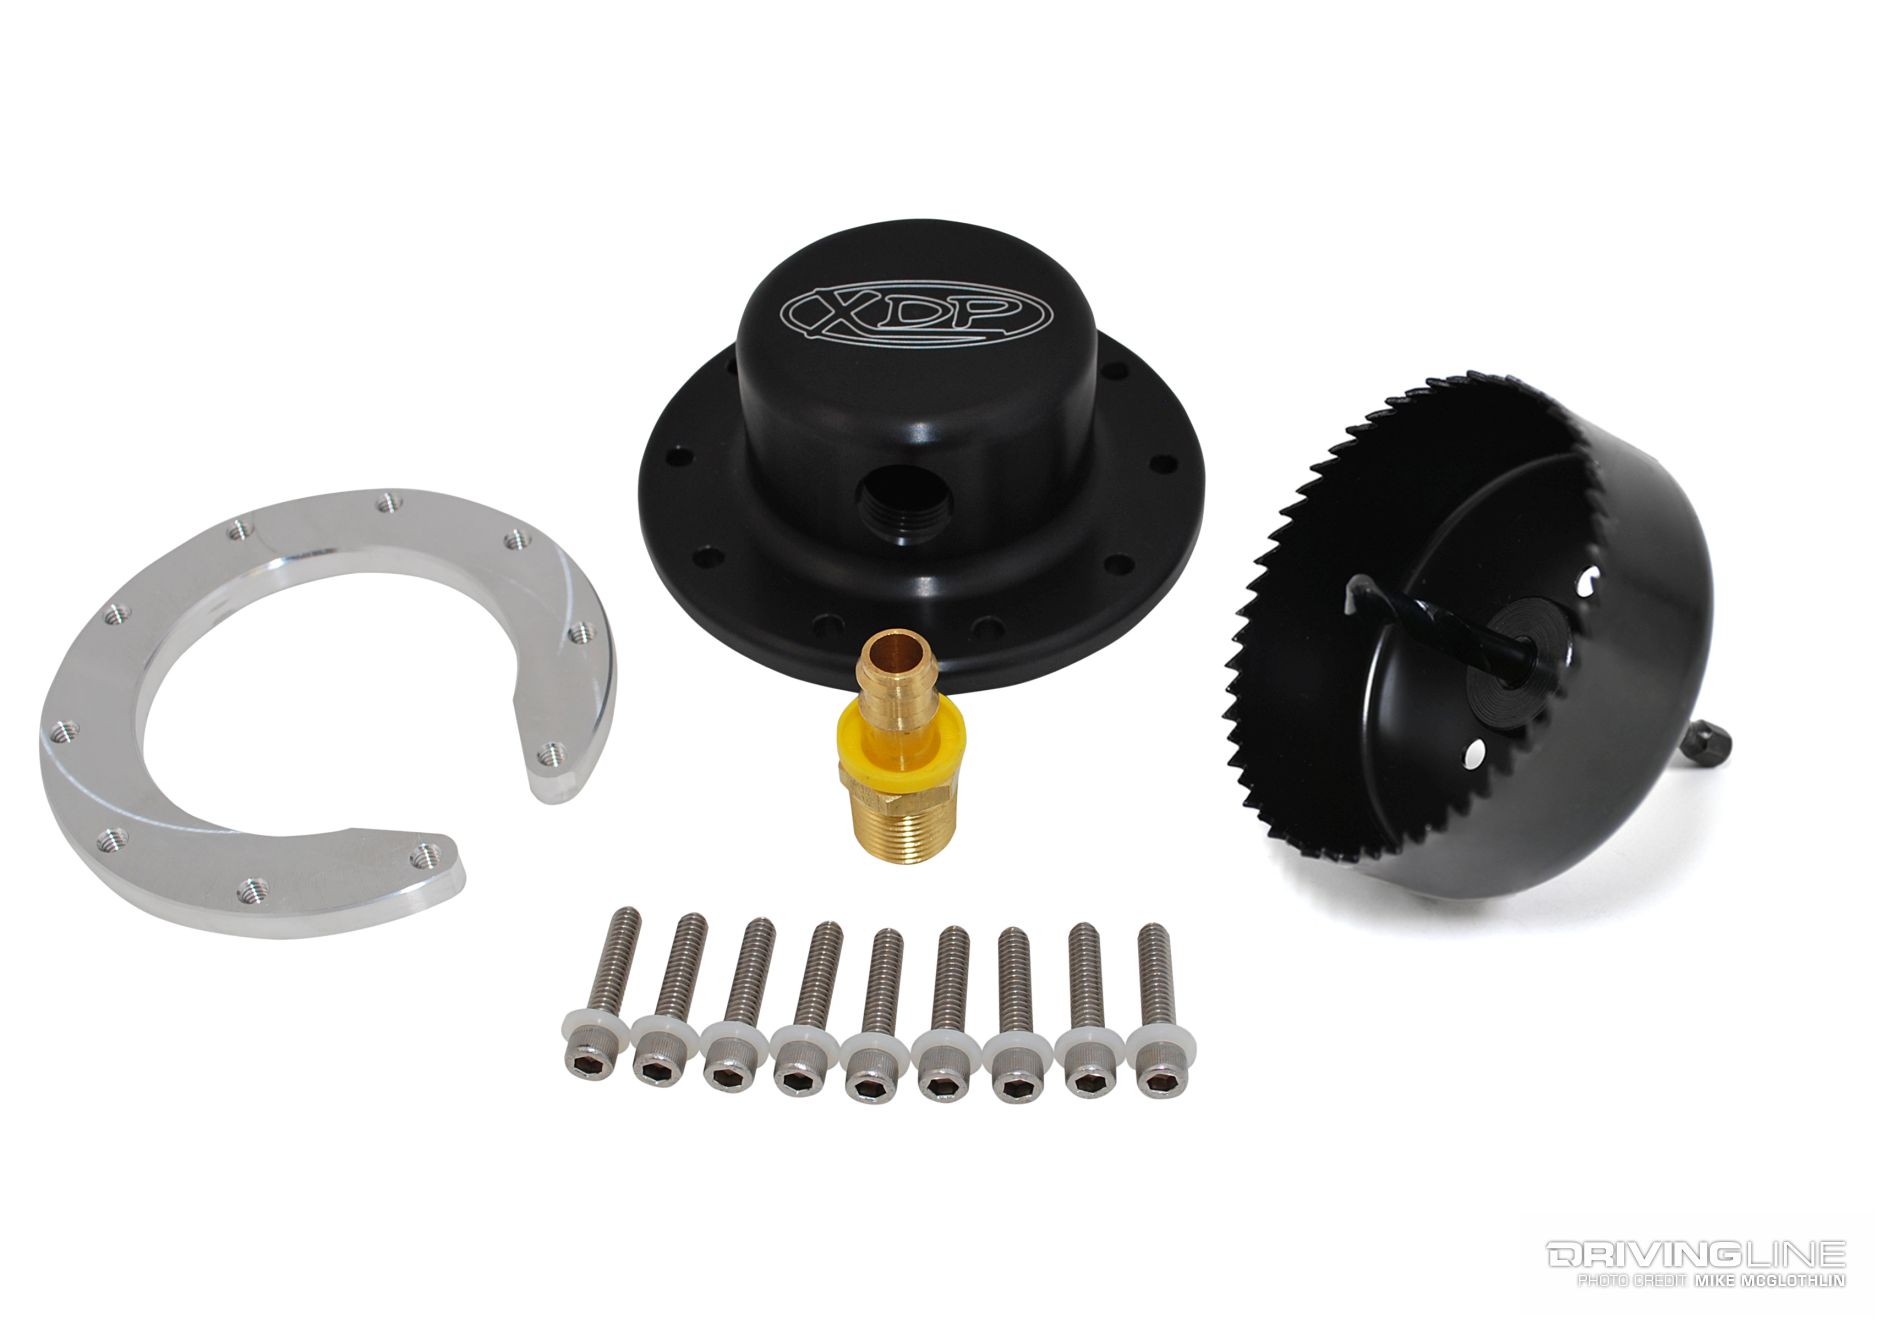 Ohio Diesel Parts Fuel Tank Sump Kit for Diesel or Gasoline Fuel Tanks with 1/2 and 5/8 Barb Sizes Black 